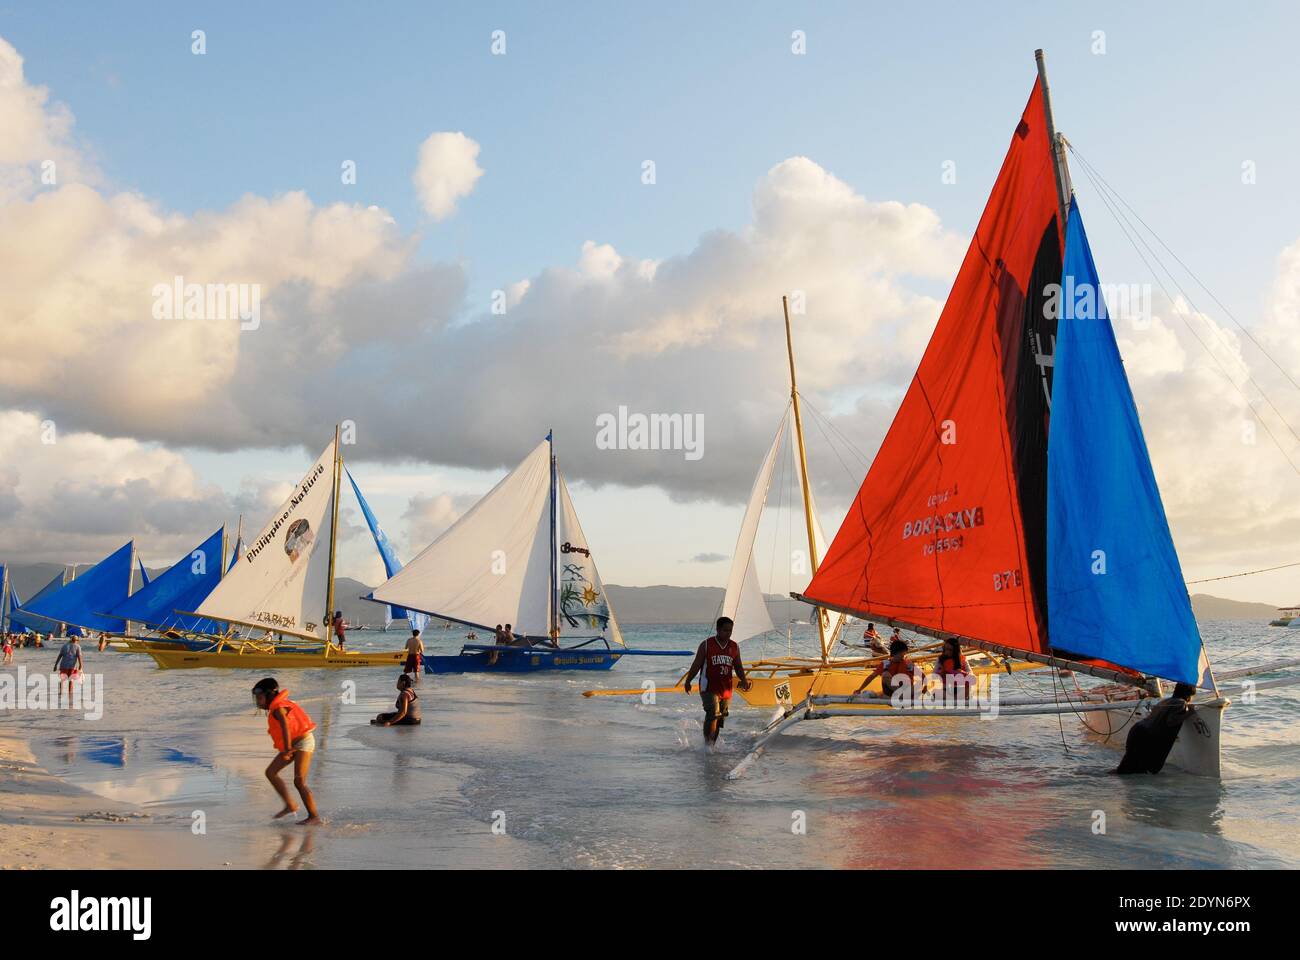 Colorful sailing boat along the White Beach on Boracay Island with few tourists and children present during sunset time, Philippines, Asia Stock Photo